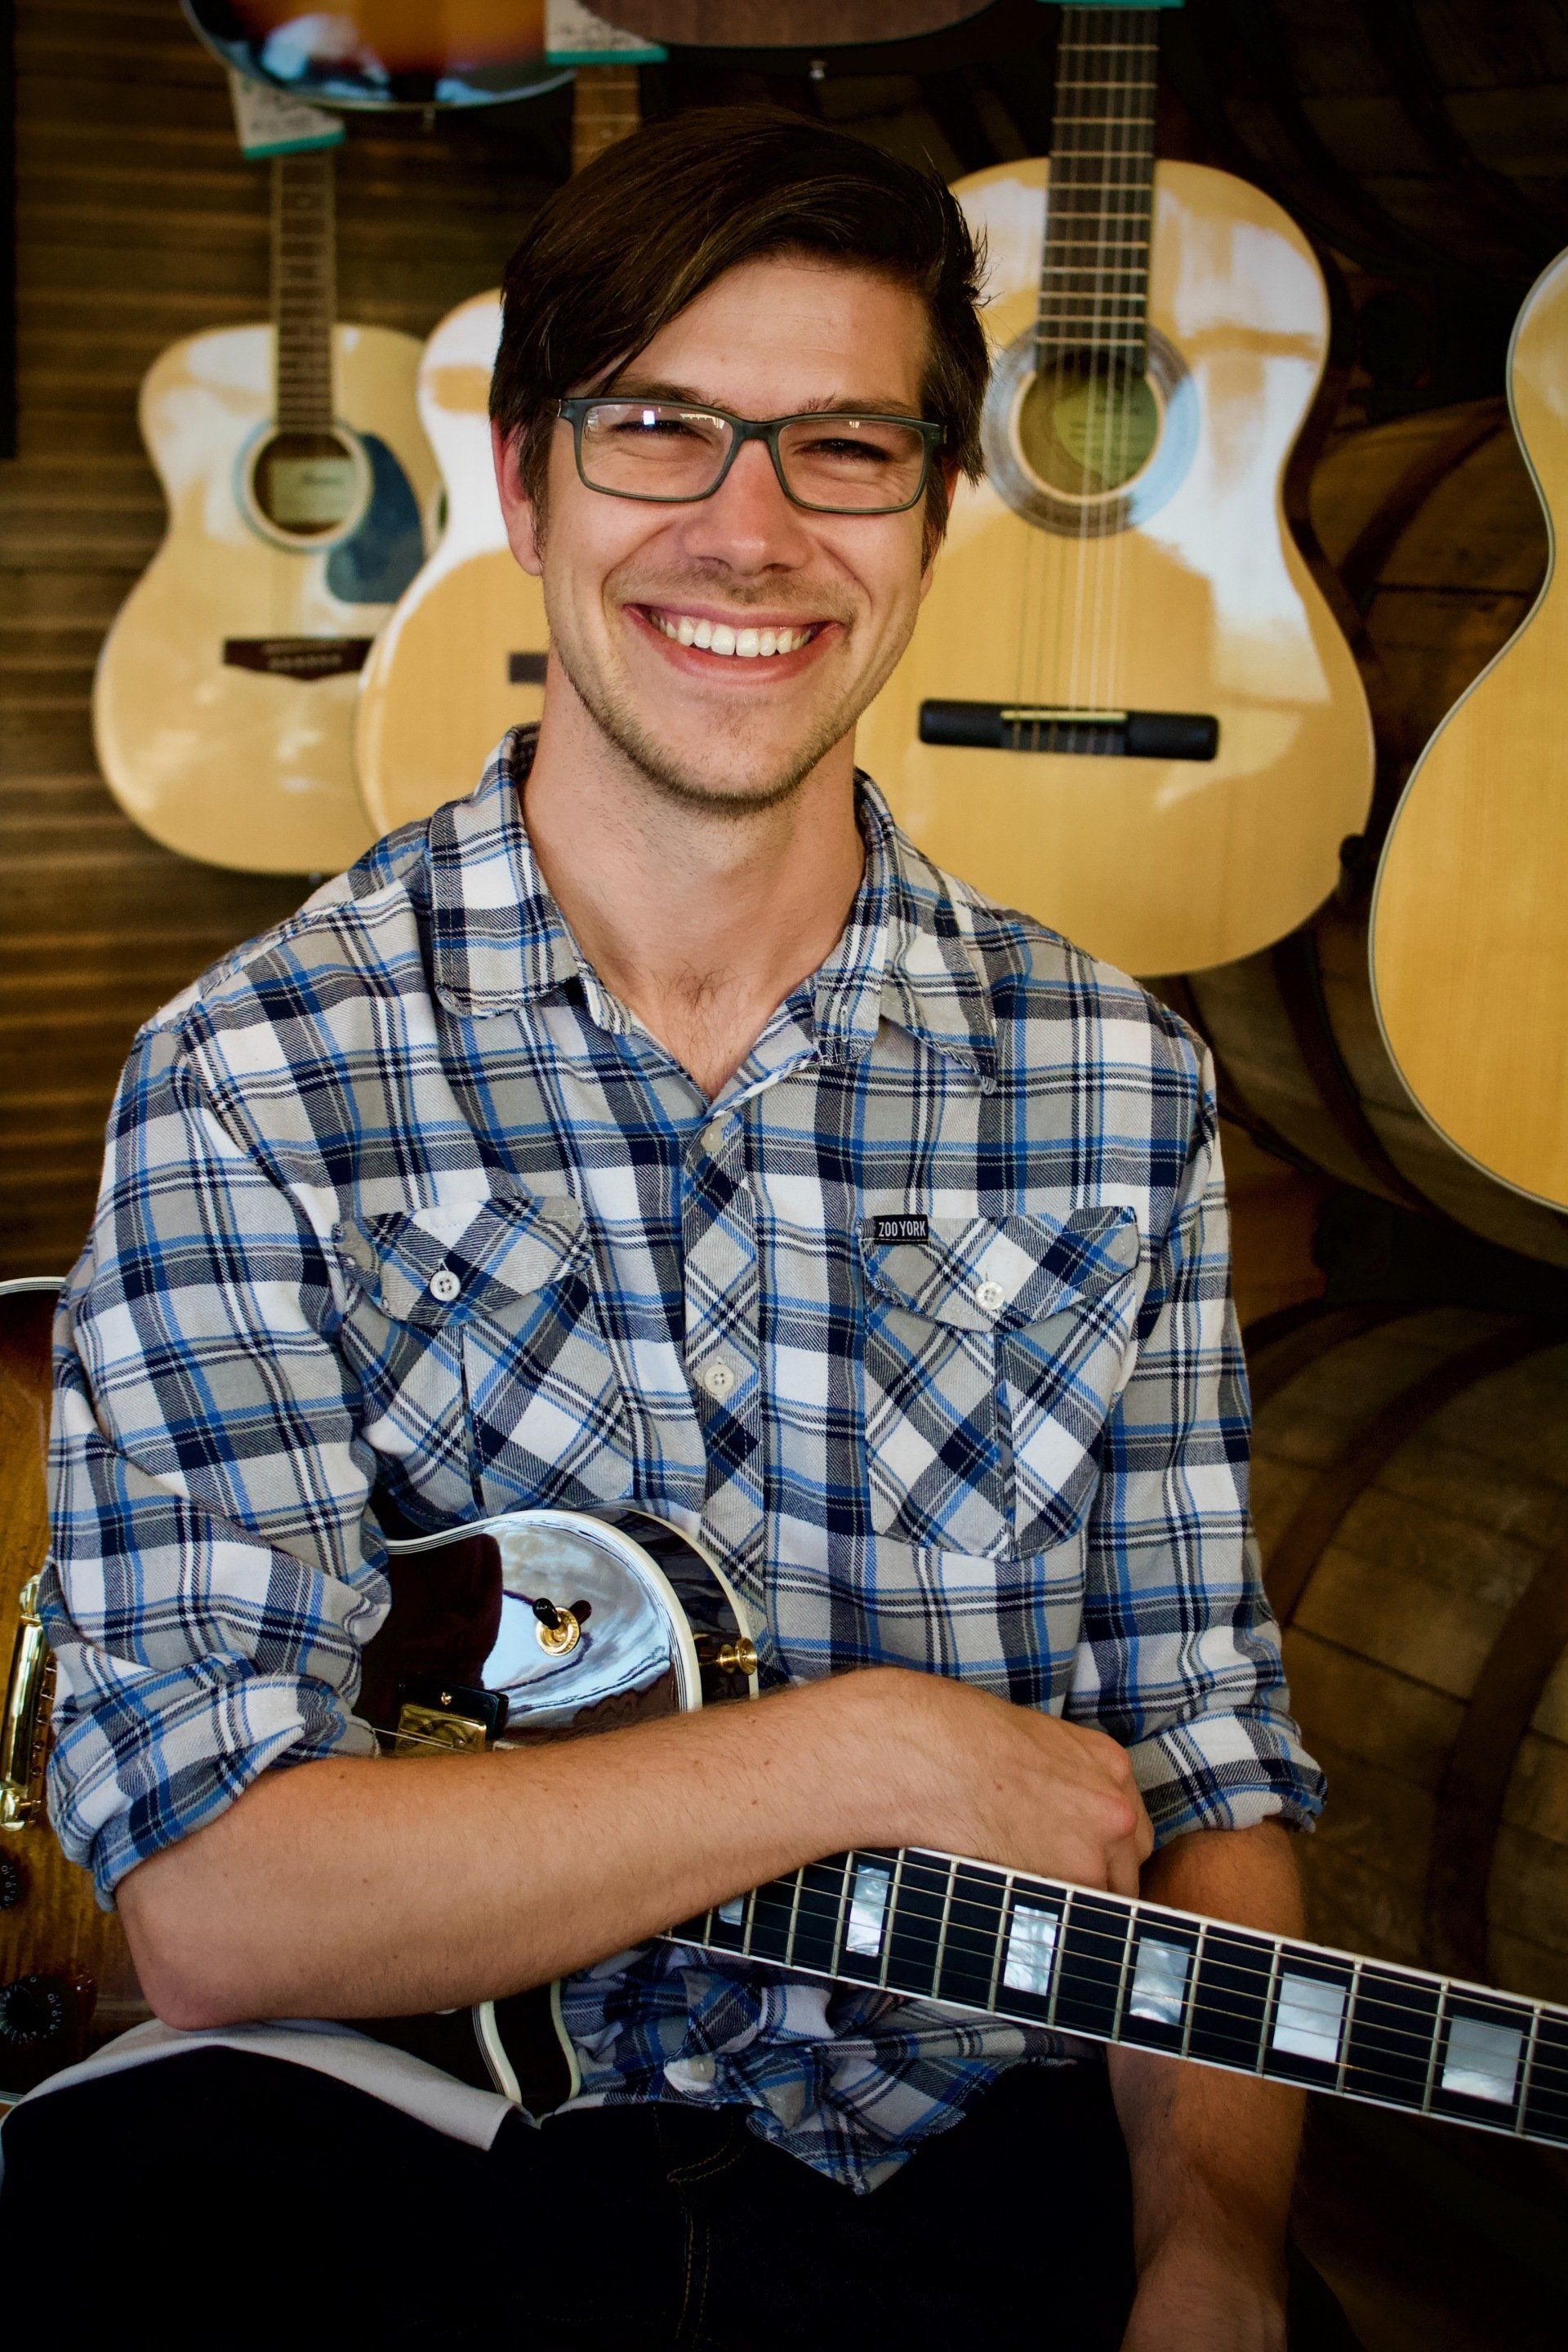 Eddie Campbell  teaches guitar lessons and ukulele classes at OC Music in RSM